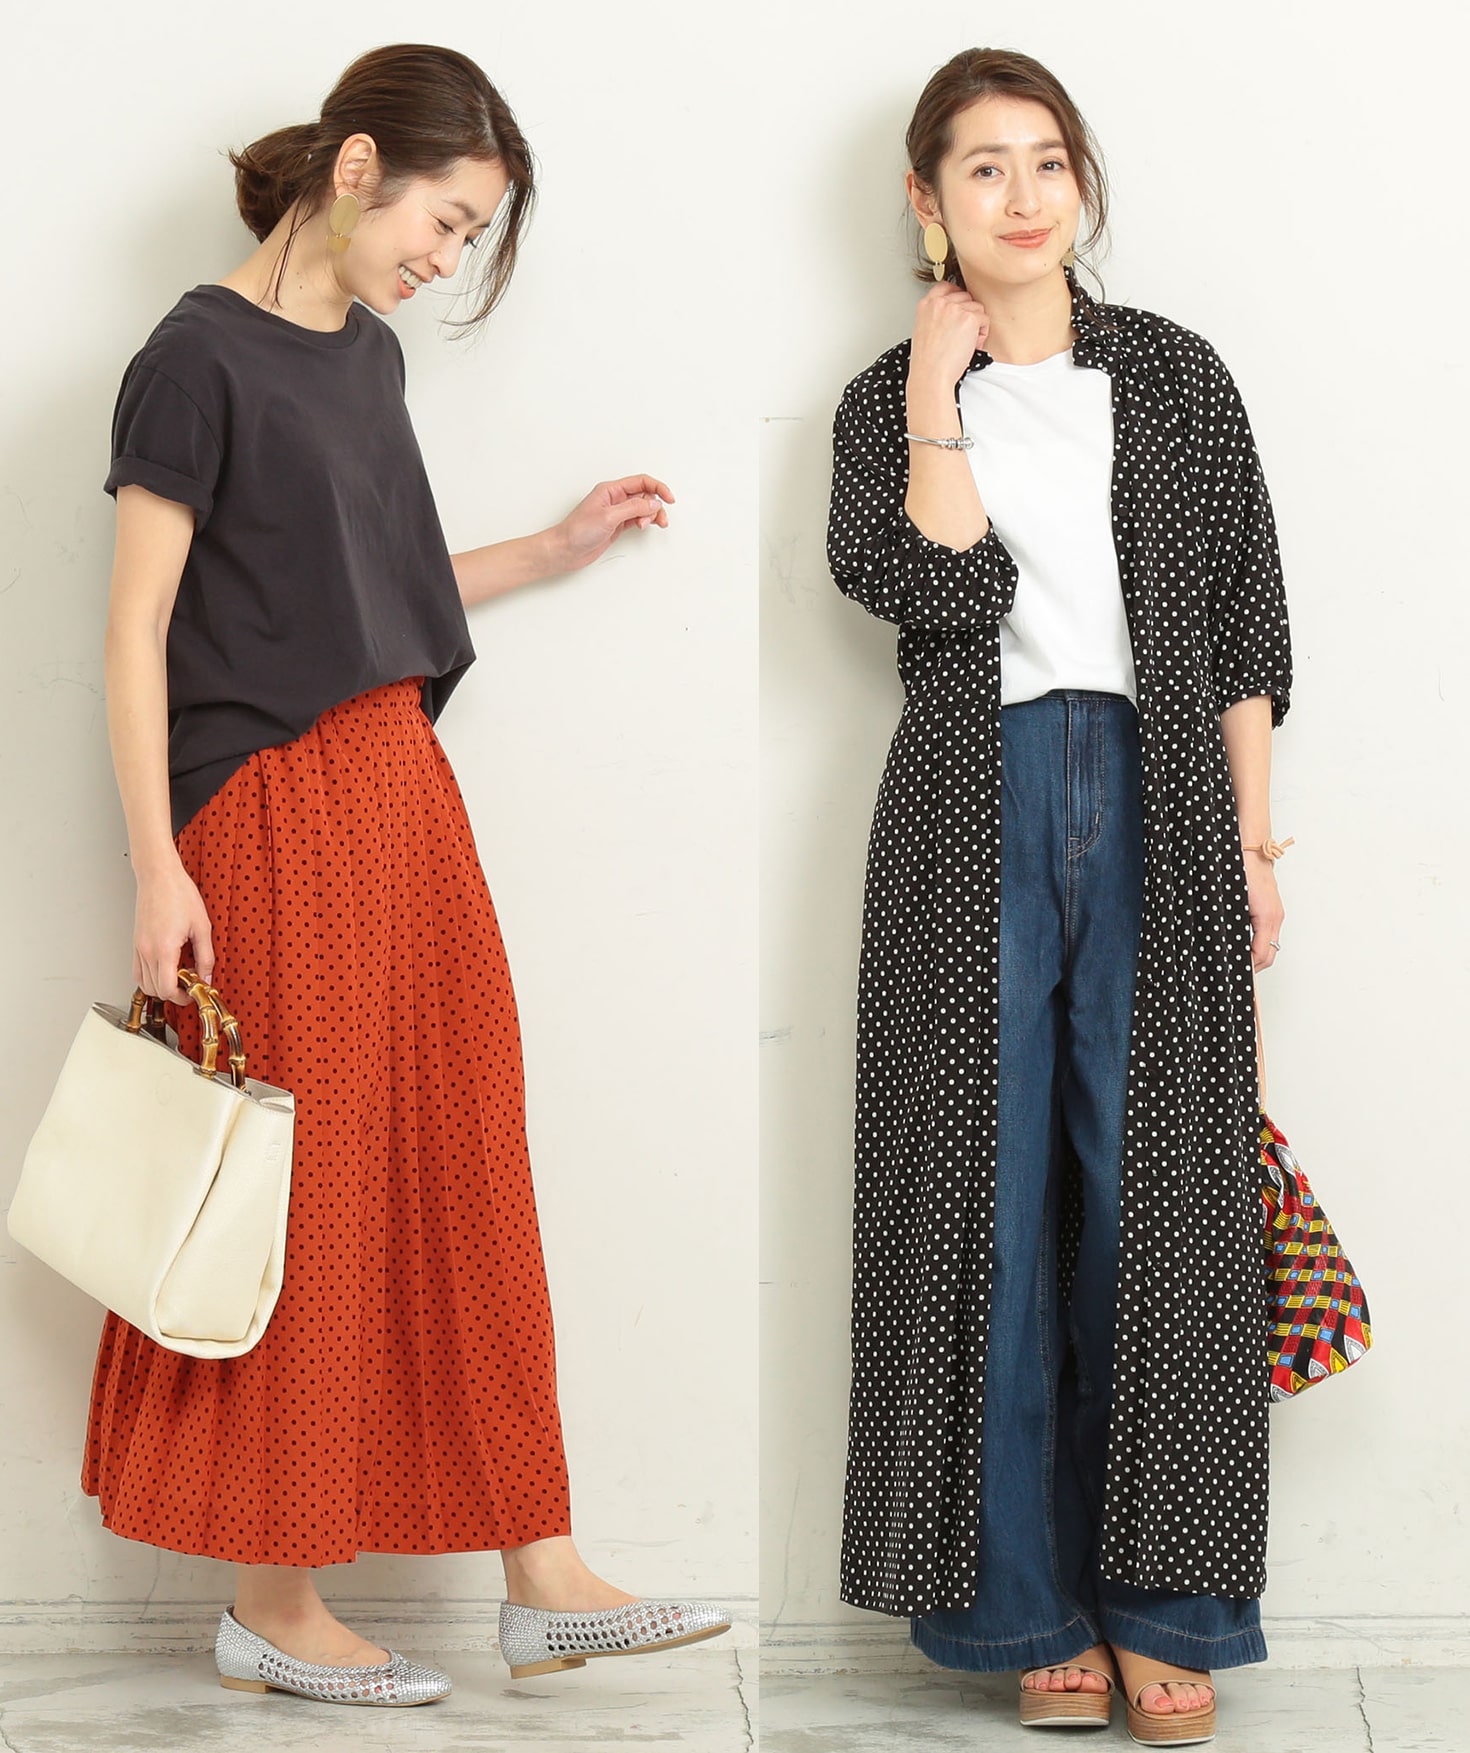 【BEAUTY&YOUTH】Daily Styling Items